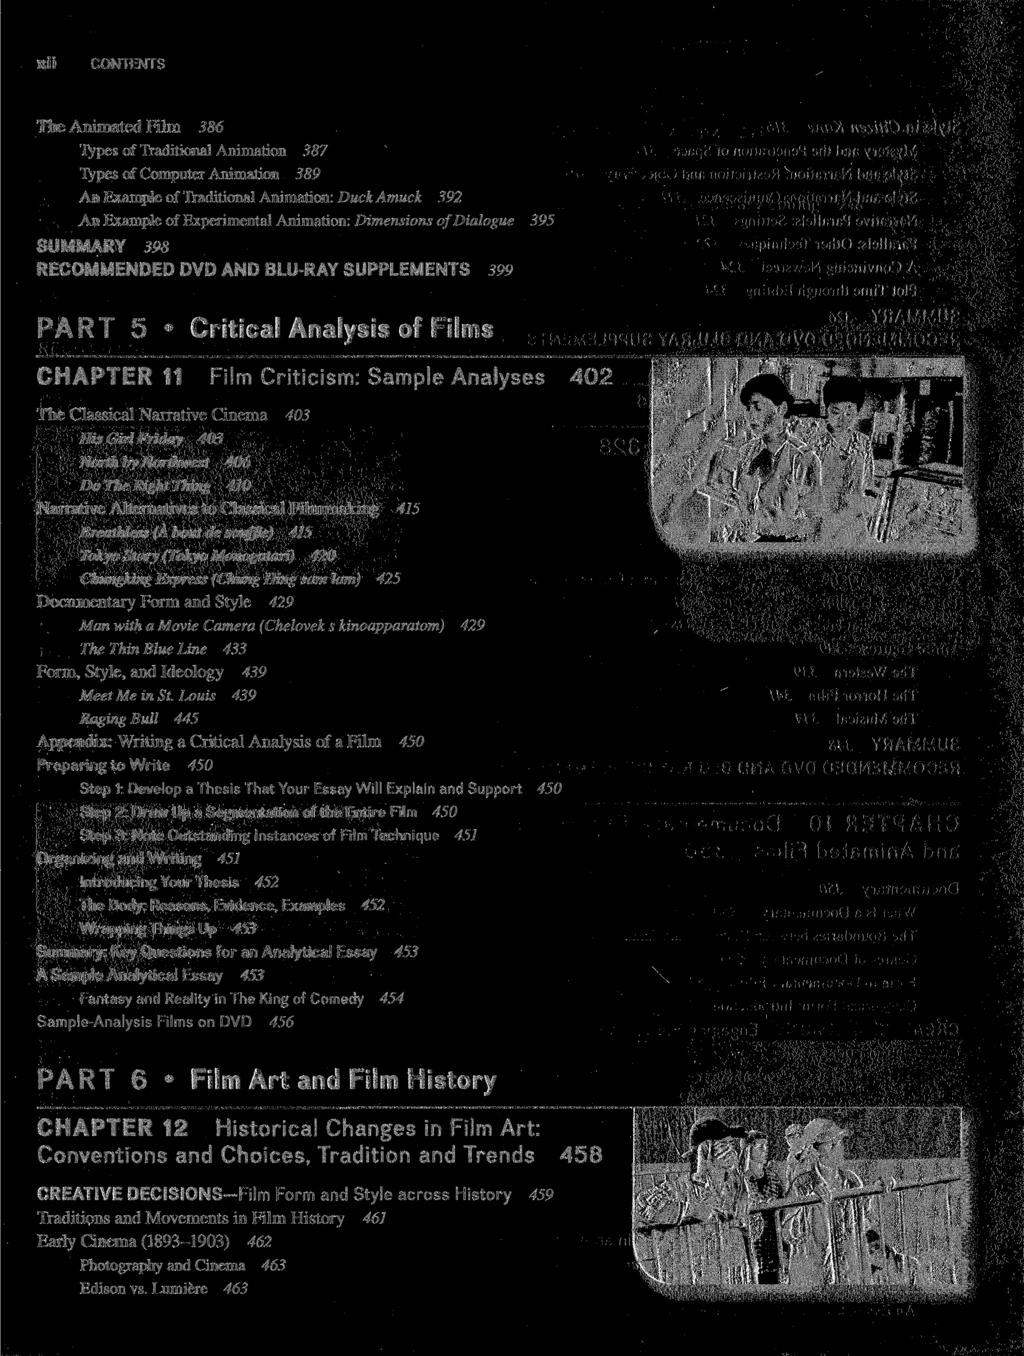 xii CONTENTS The Animated Film 386 Types of Traditional Animation 387 Types of Computer Animation 389 An Example of Traditional Animation: Duck Amuck 392 An Example of Experimental Animation: